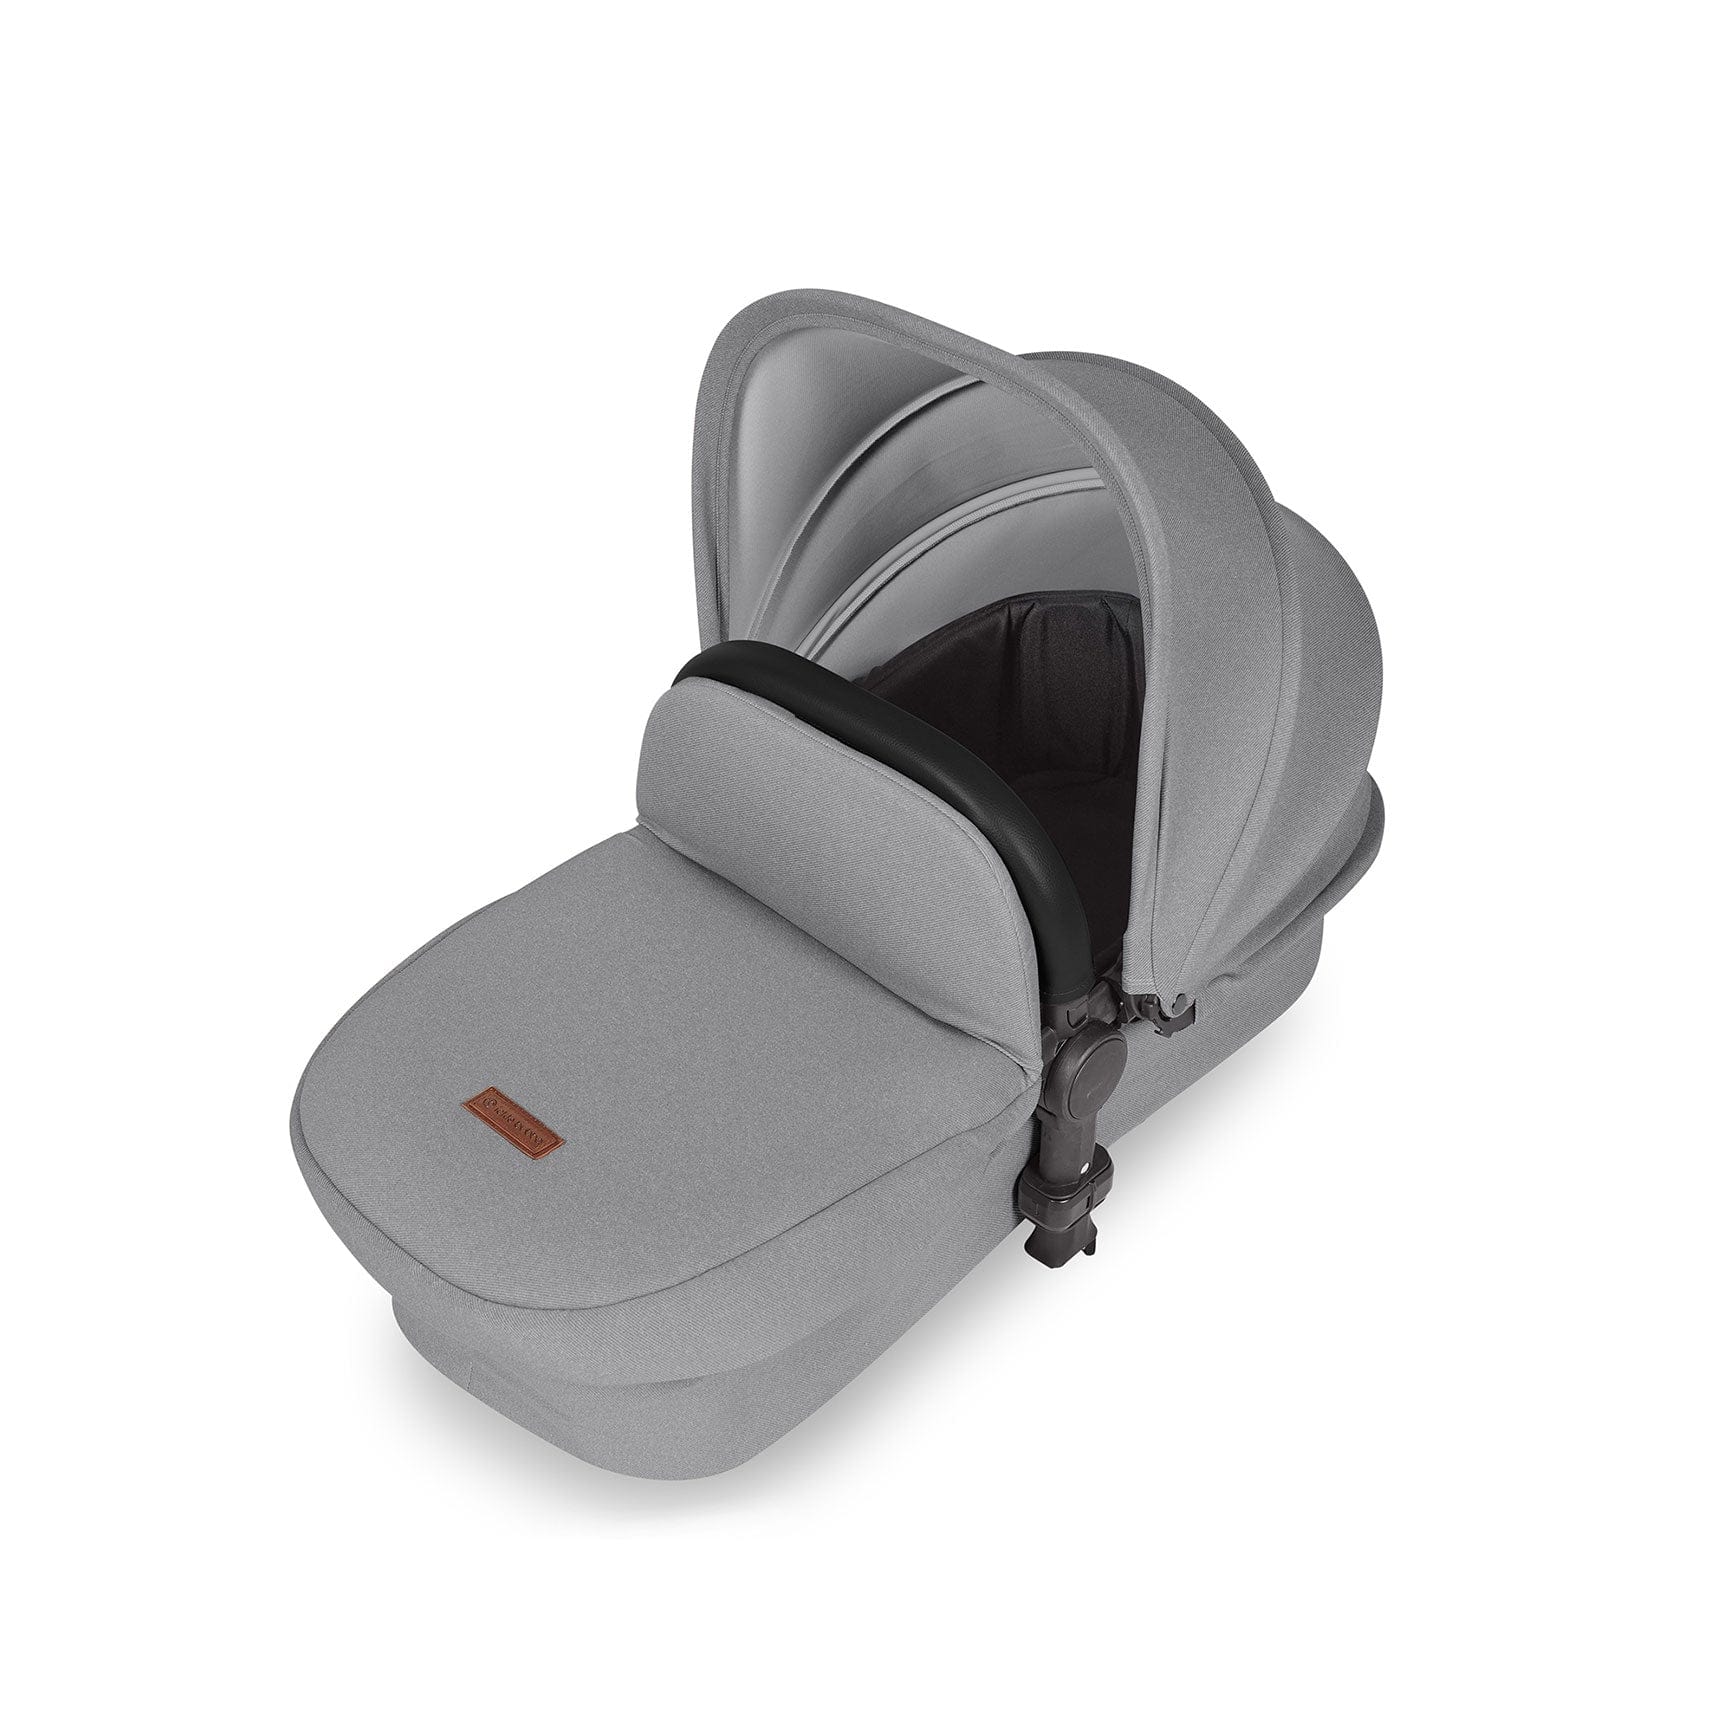 Ickle Bubba Stomp Luxe 2-in-1 Plus Pushchair & Carrycot in Silver/Pearl Grey/Black Travel Systems 10-003-001-259 5056515026337